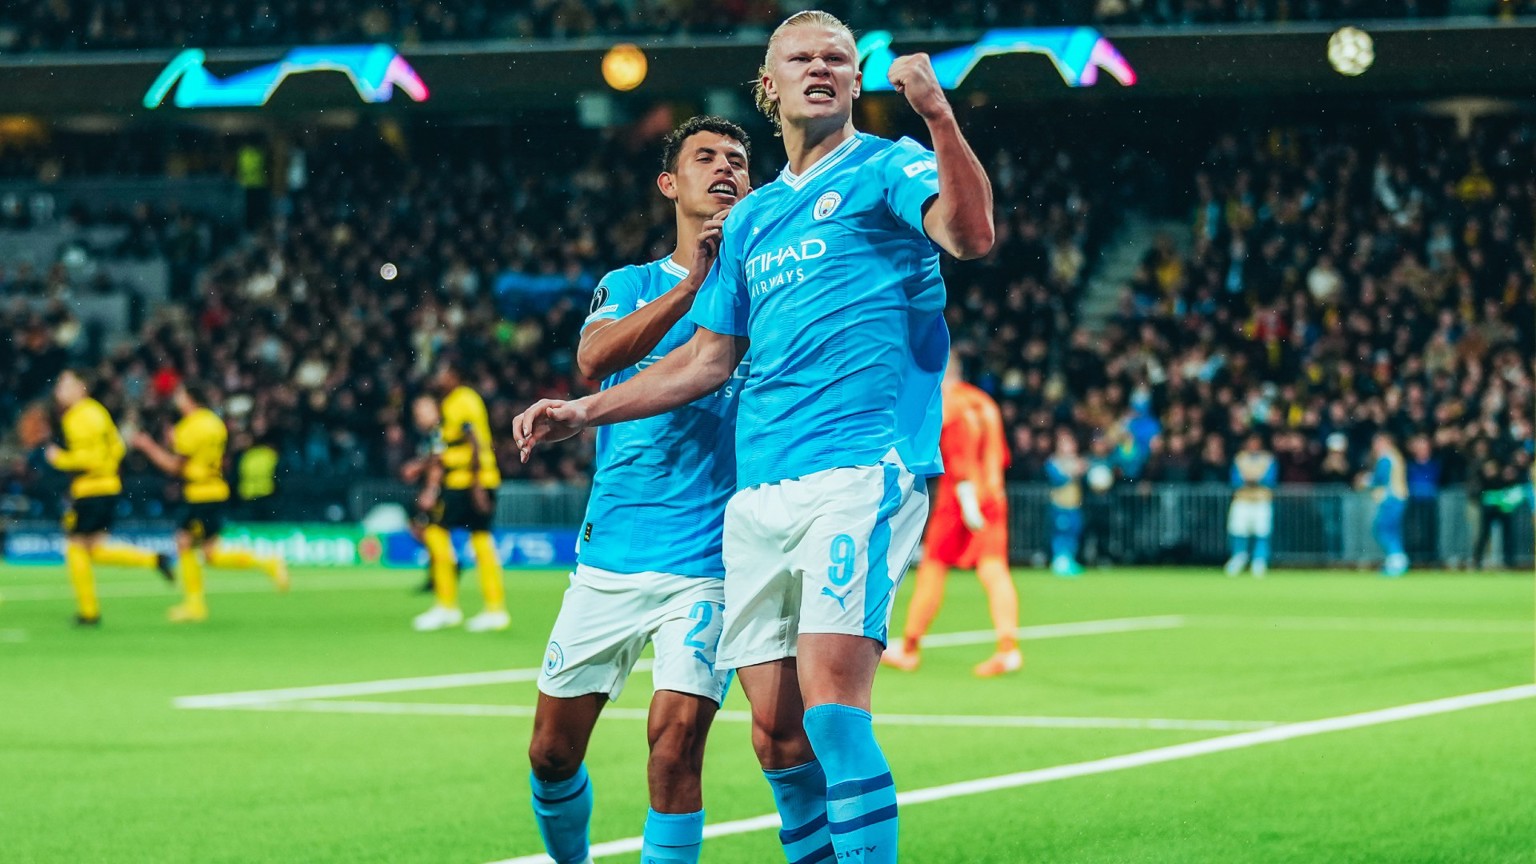 City extend perfect Champions League record with win over BSC Young Boys